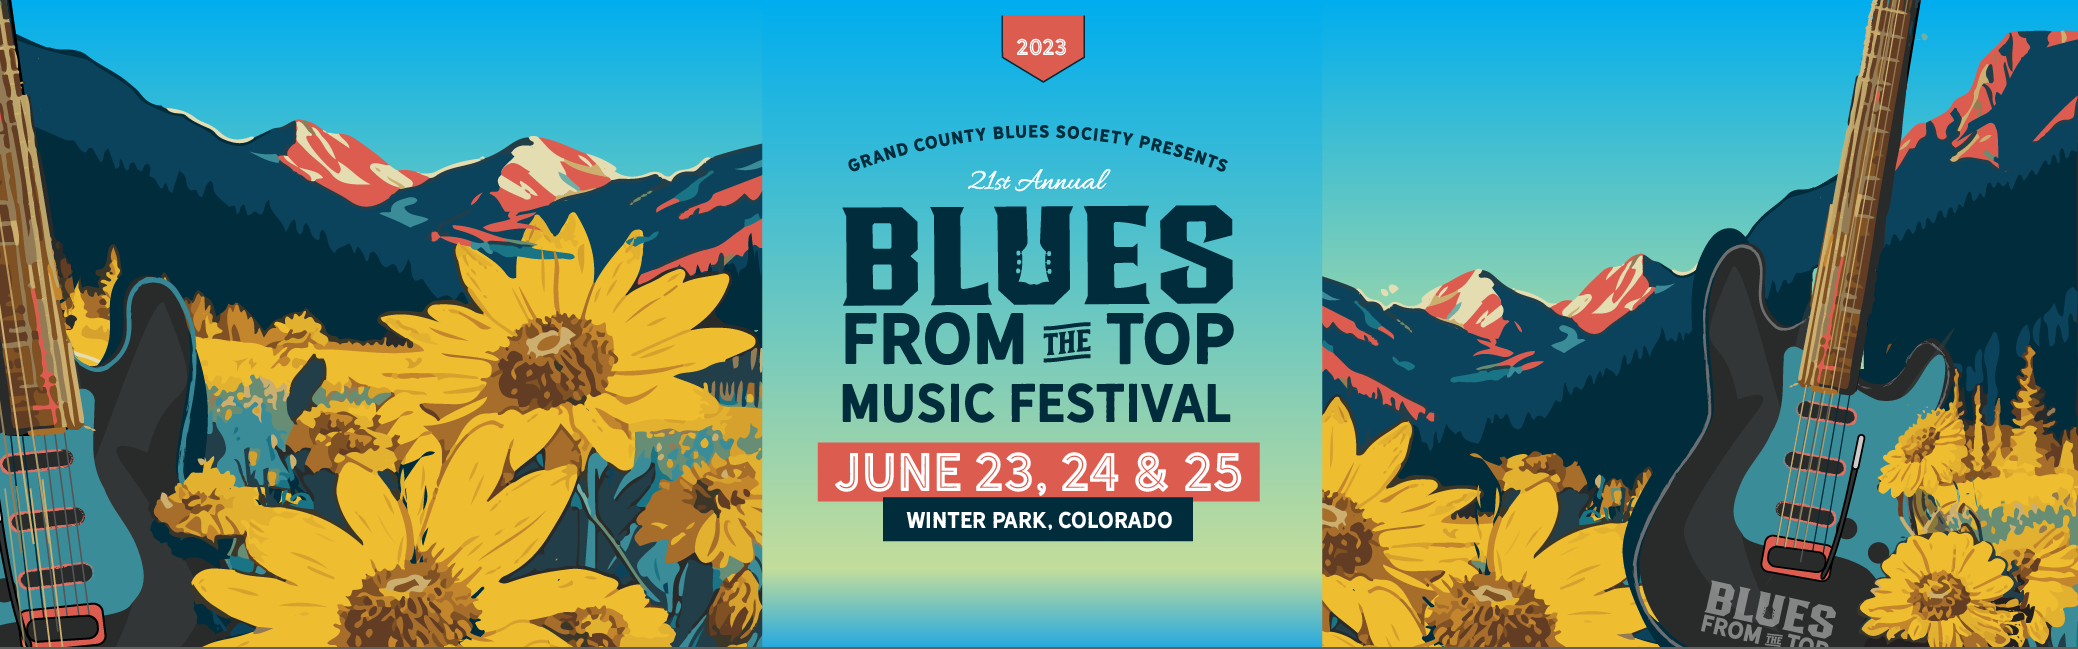 Blues from the top music festival 2023 winter park colorado June 23 - 25